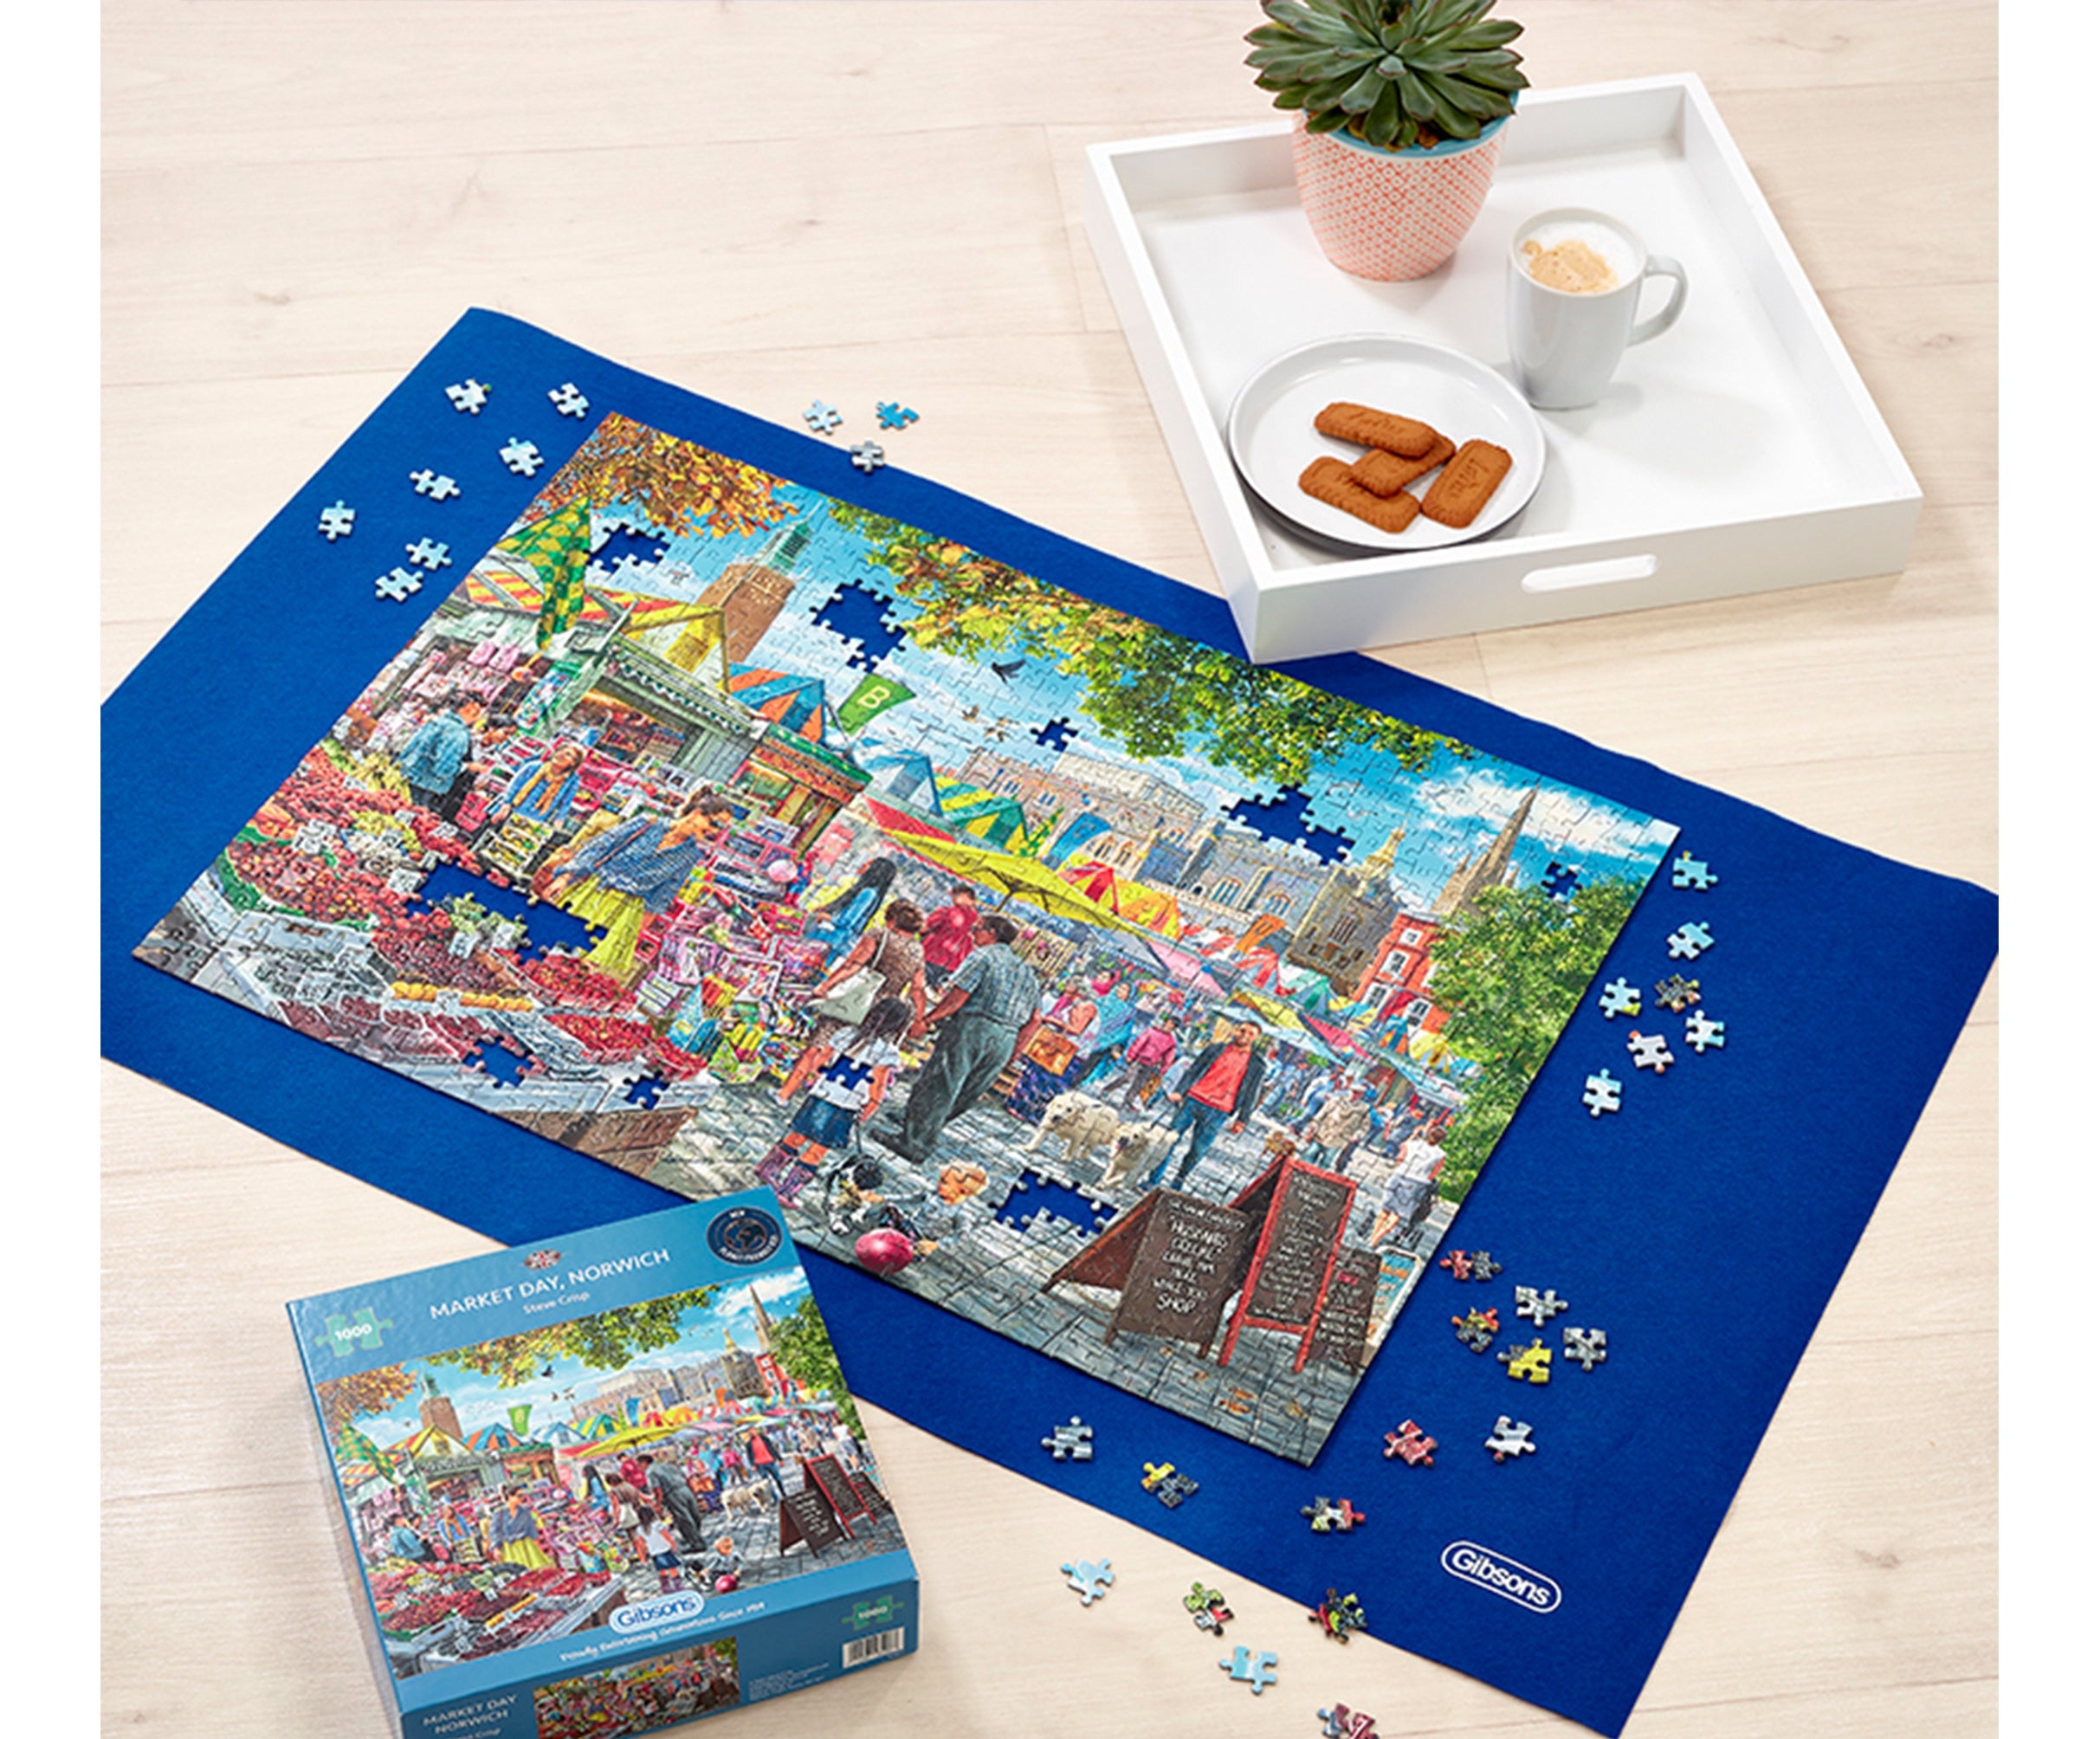 Common Misconceptions of Jigsaw Puzzles